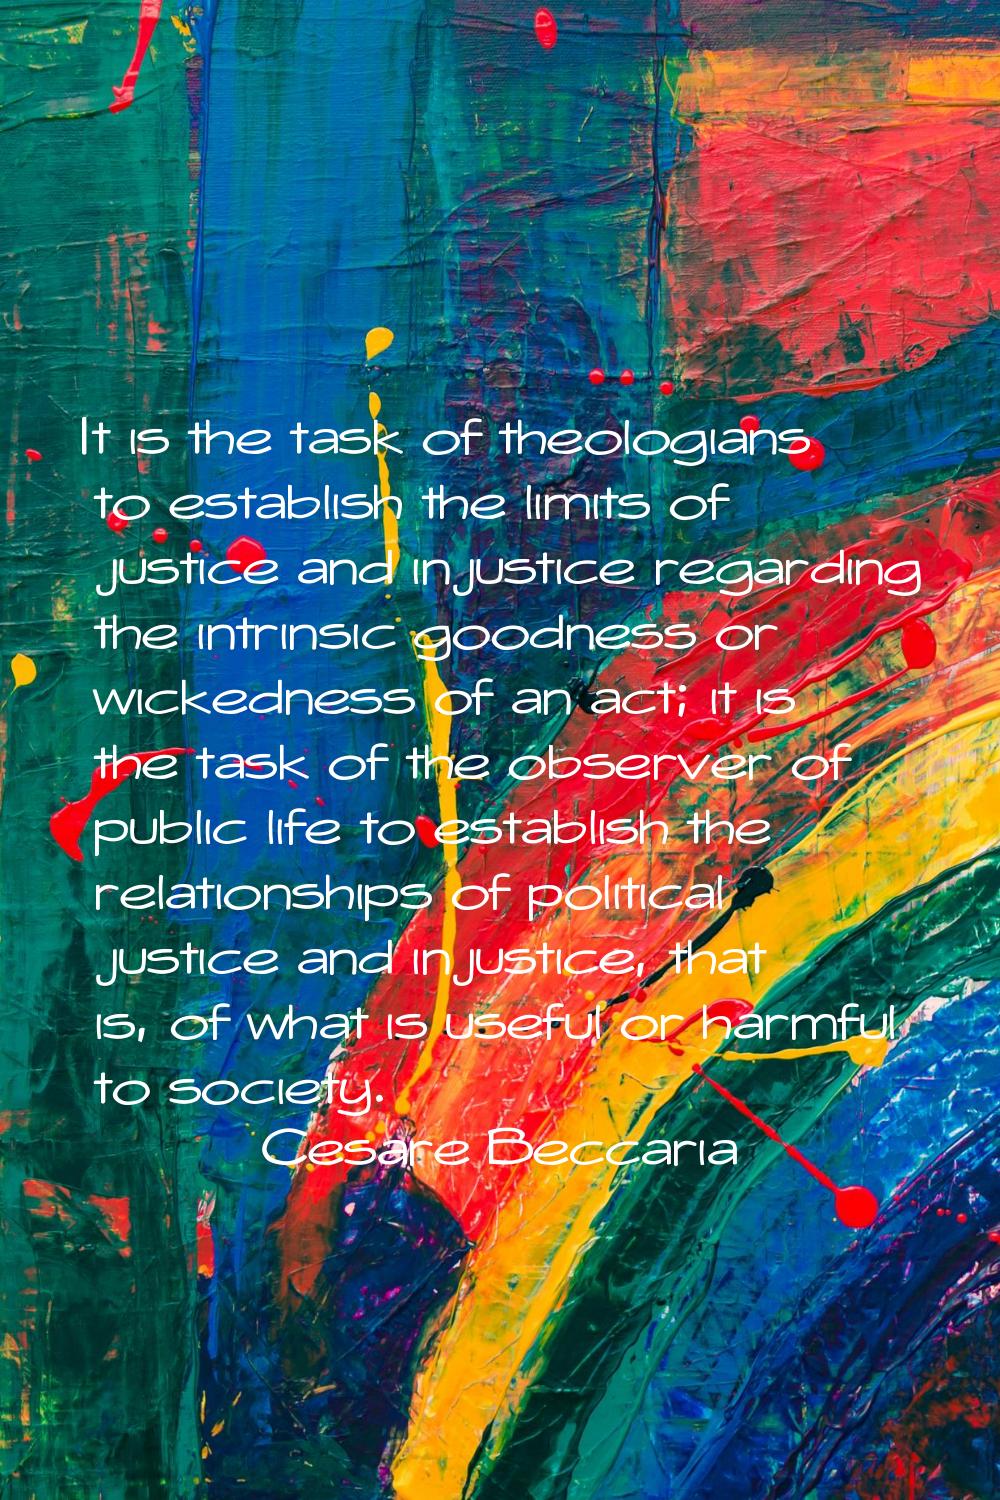 It is the task of theologians to establish the limits of justice and injustice regarding the intrin